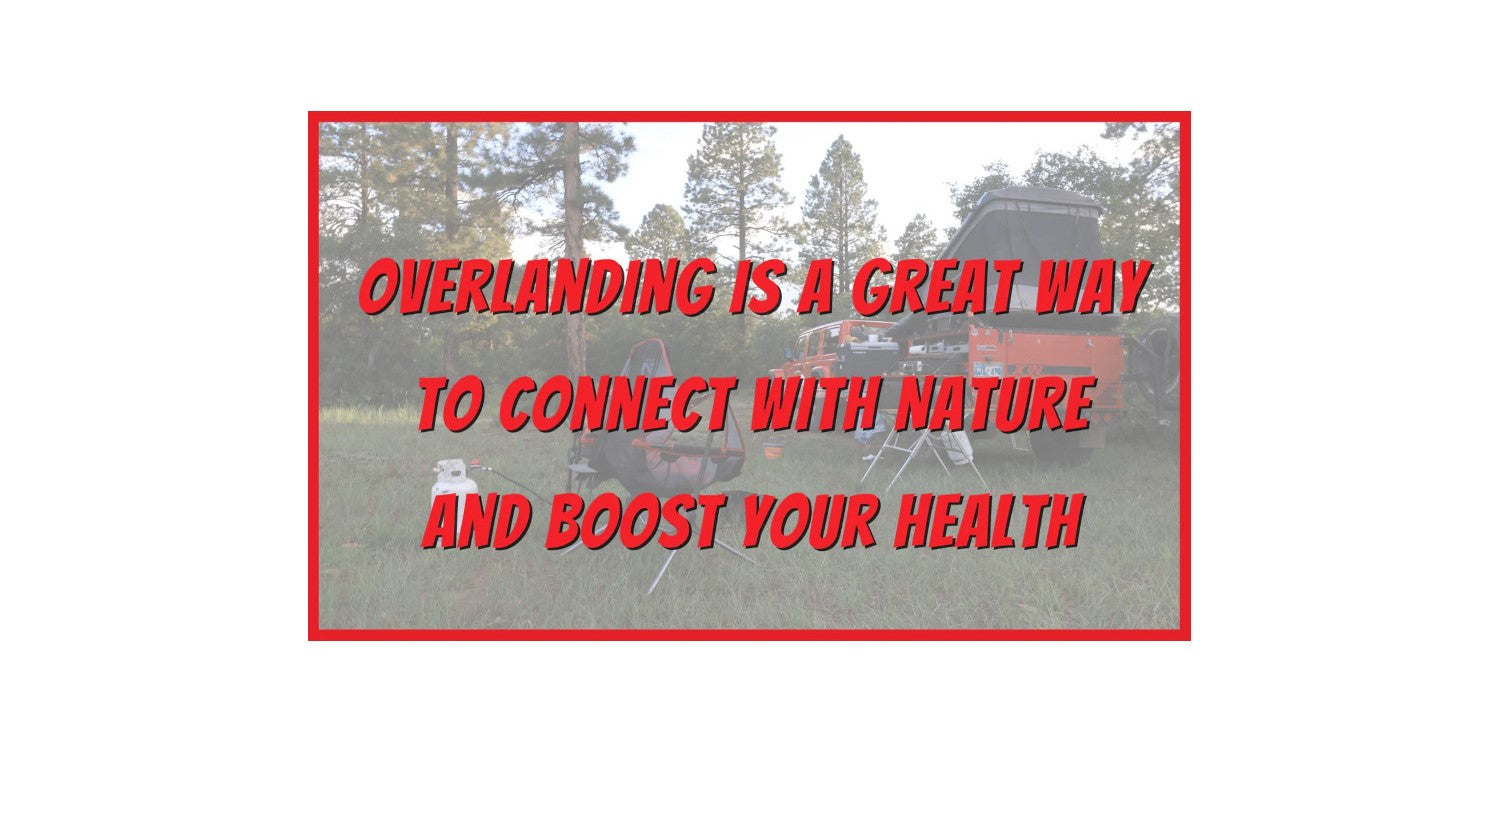 Overlanding Is a Great Way to Connect with Nature and Boost Your Health